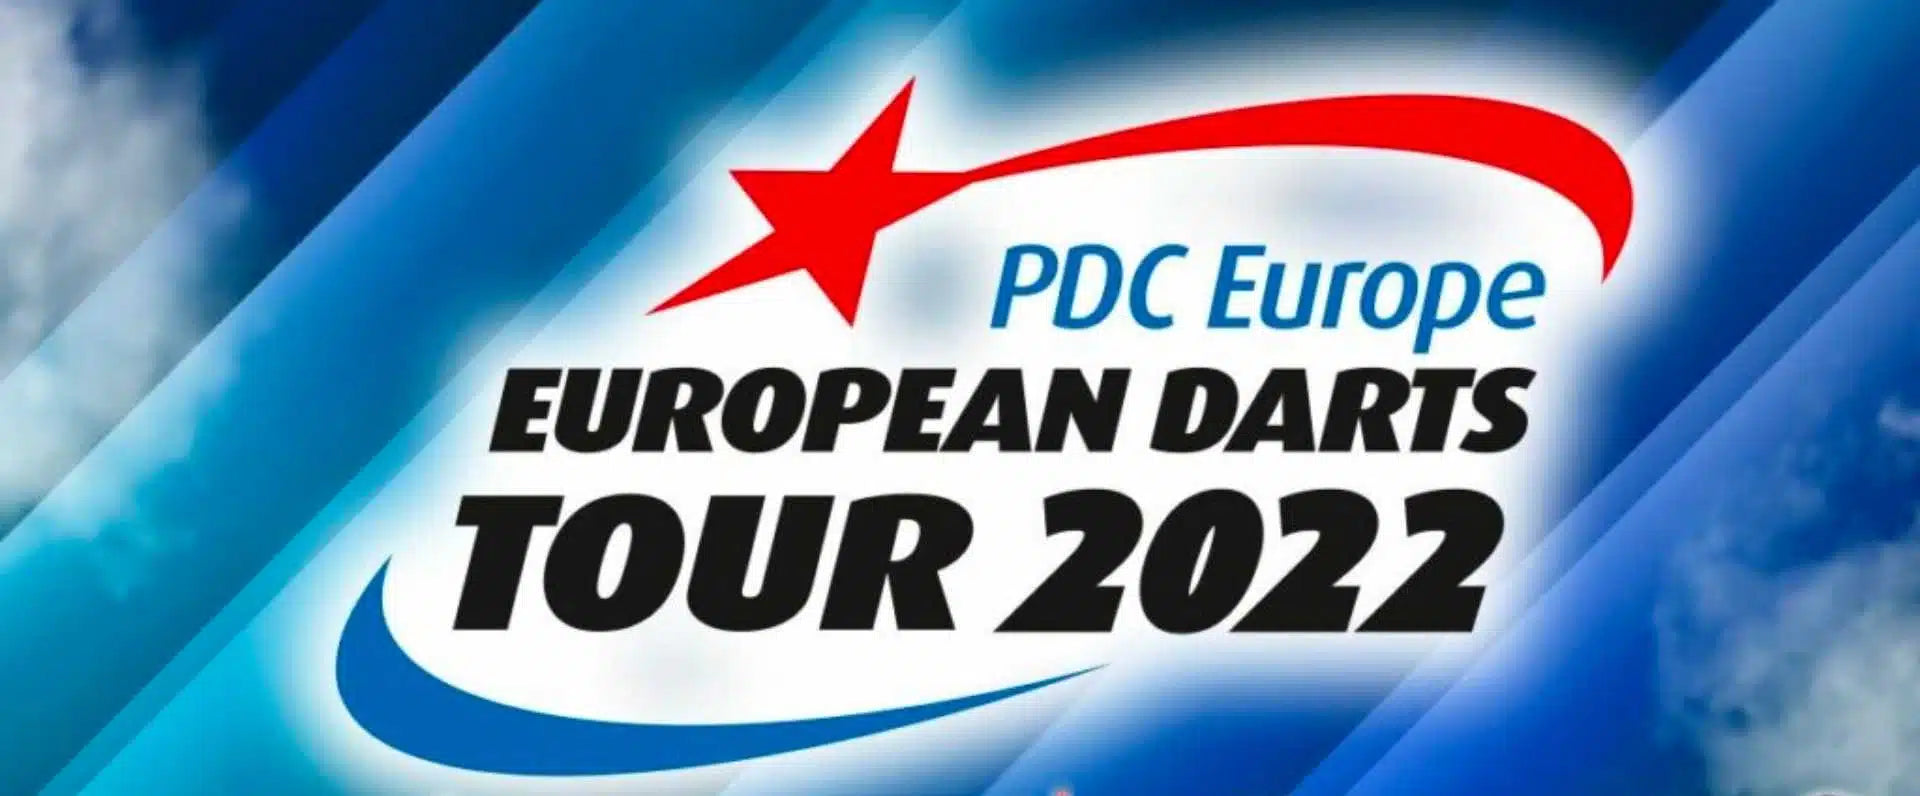 PDC Europe andamp; European Darts Tour explained quickly and easily